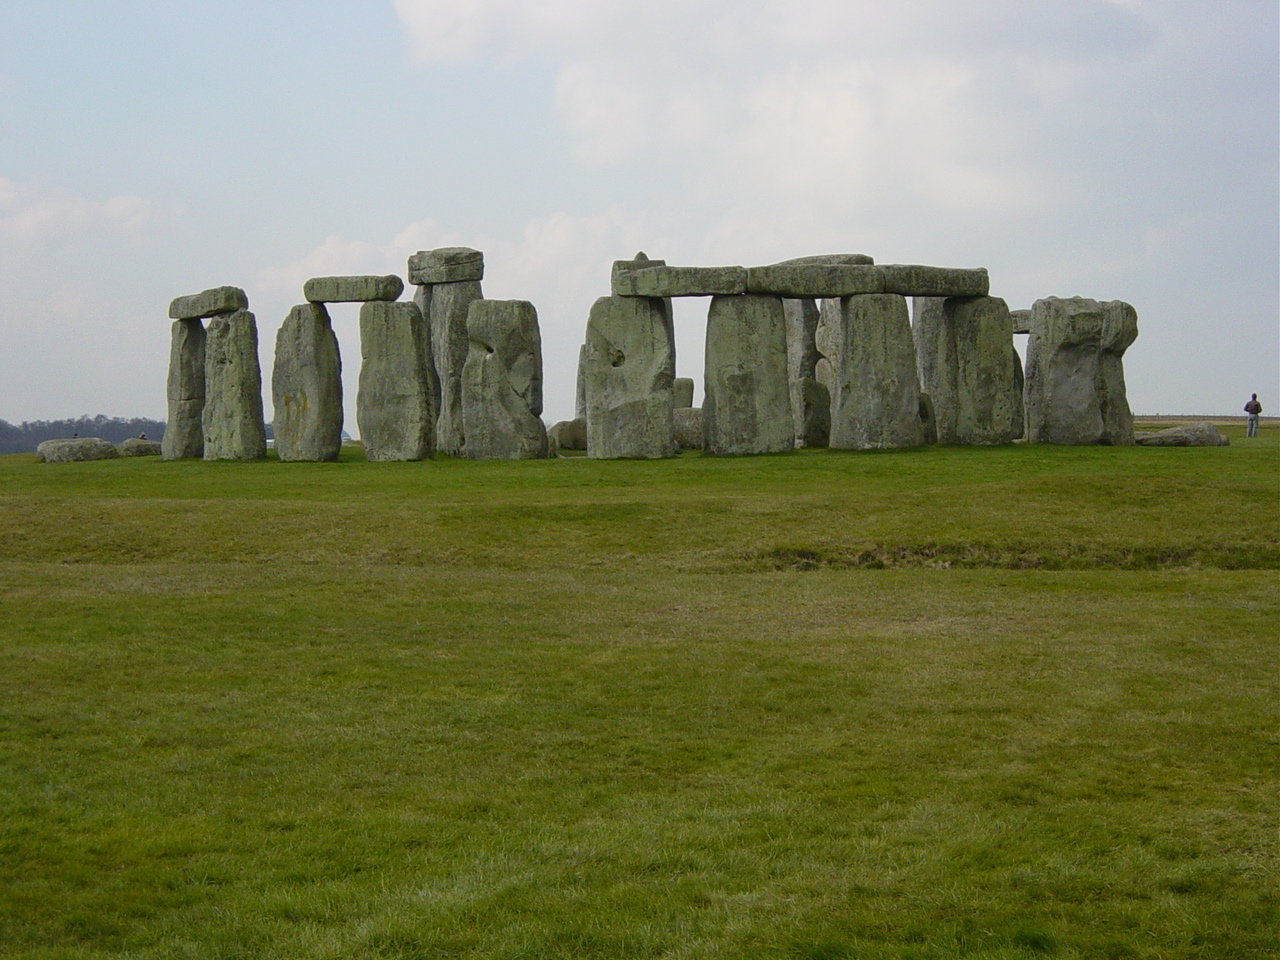 http://commons.wikimedia.org/w/index.php?title=File:Stonehenge_Wide_Angle.jpg&oldid=5177859